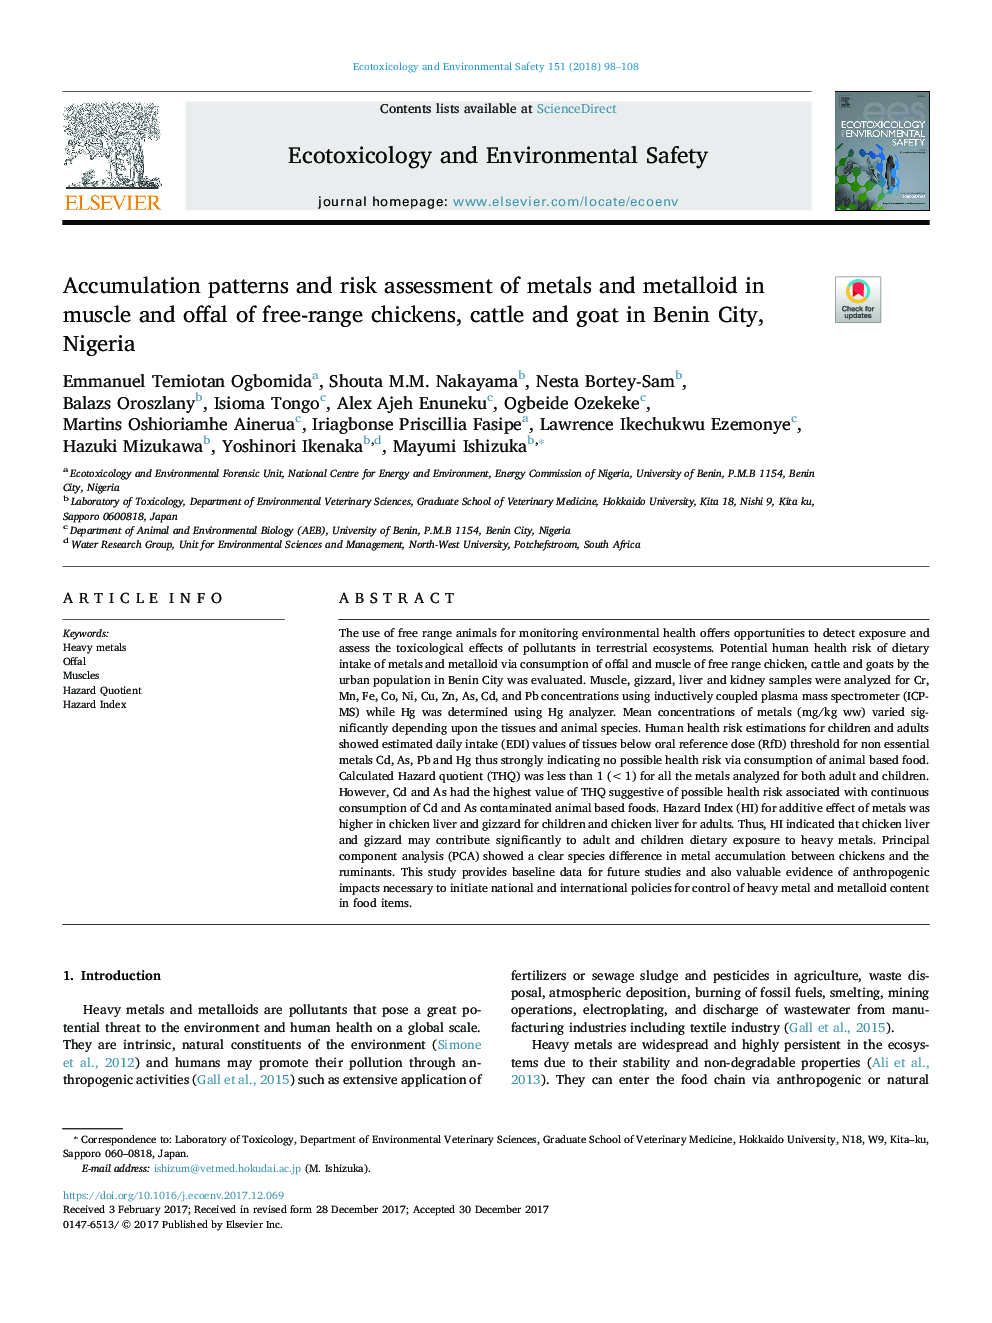 Accumulation patterns and risk assessment of metals and metalloid in muscle and offal of free-range chickens, cattle and goat in Benin City, Nigeria